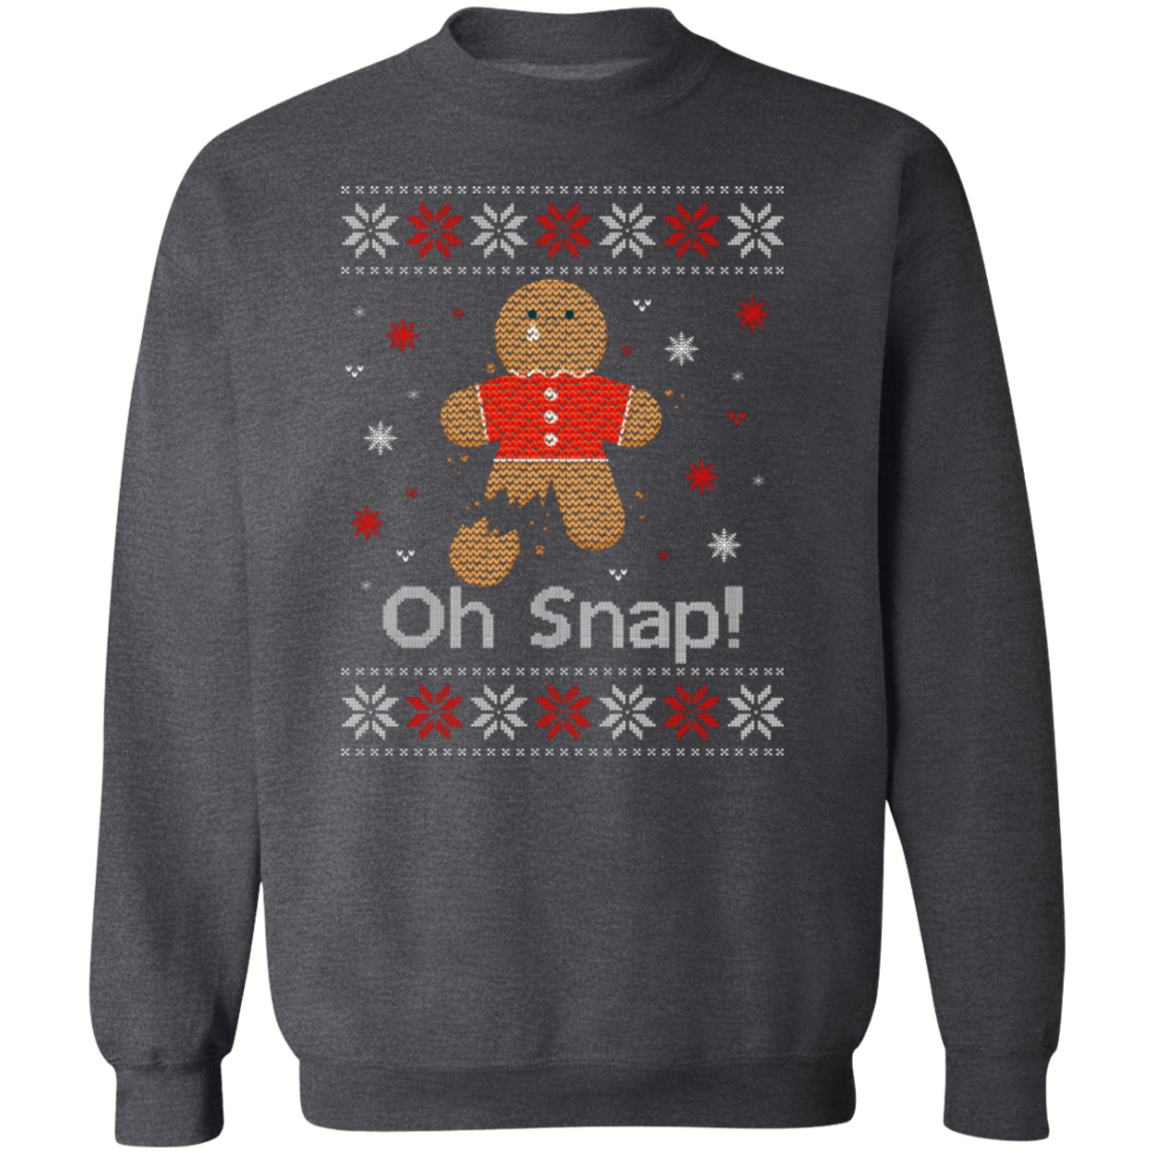 Oh Snap! - Unisex Ugly Sweater, Christmas, Winter, Fall